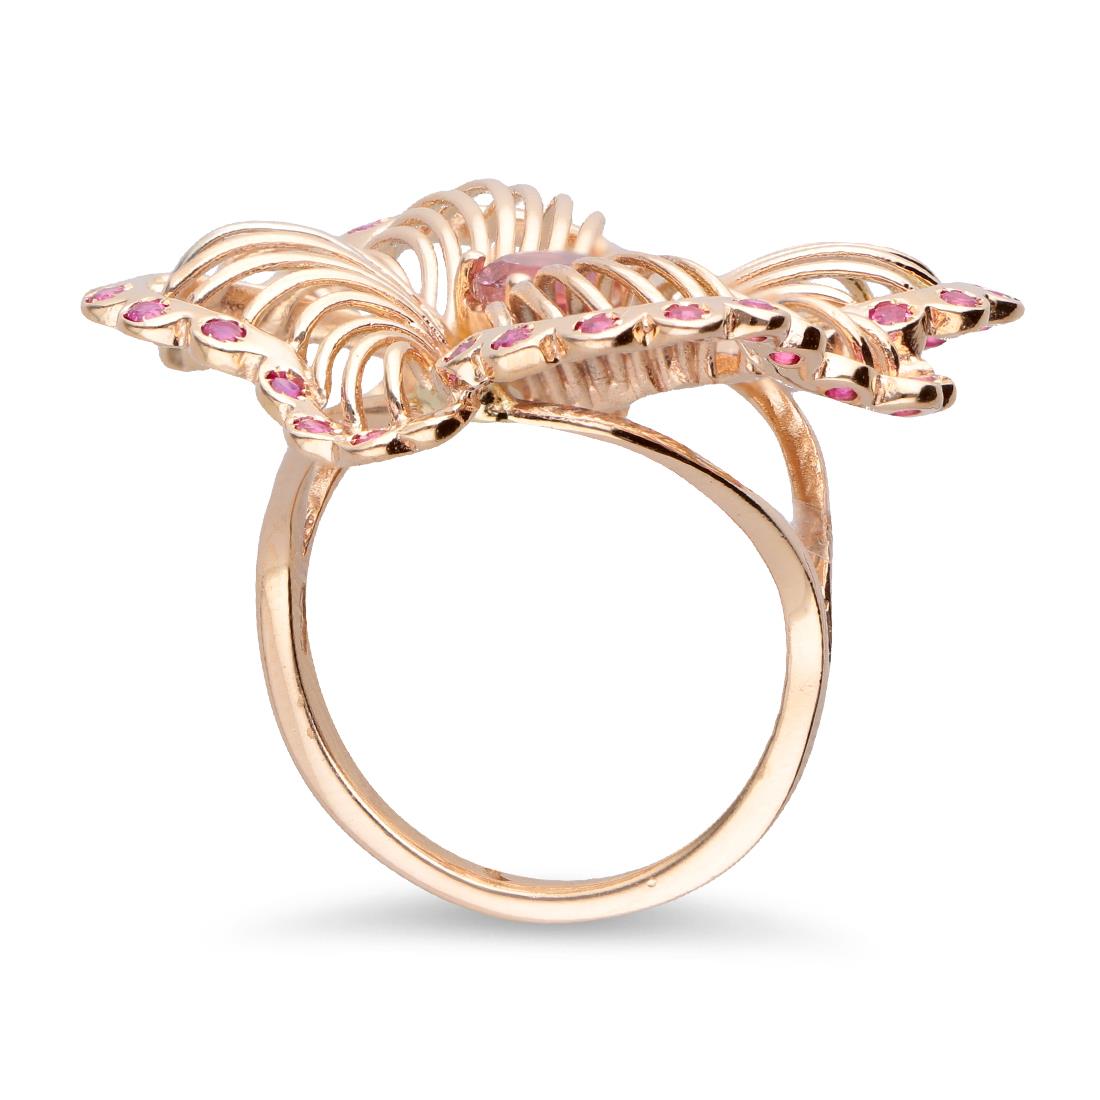 Rose gold ring with pink tourmaline stones - STANOPPI